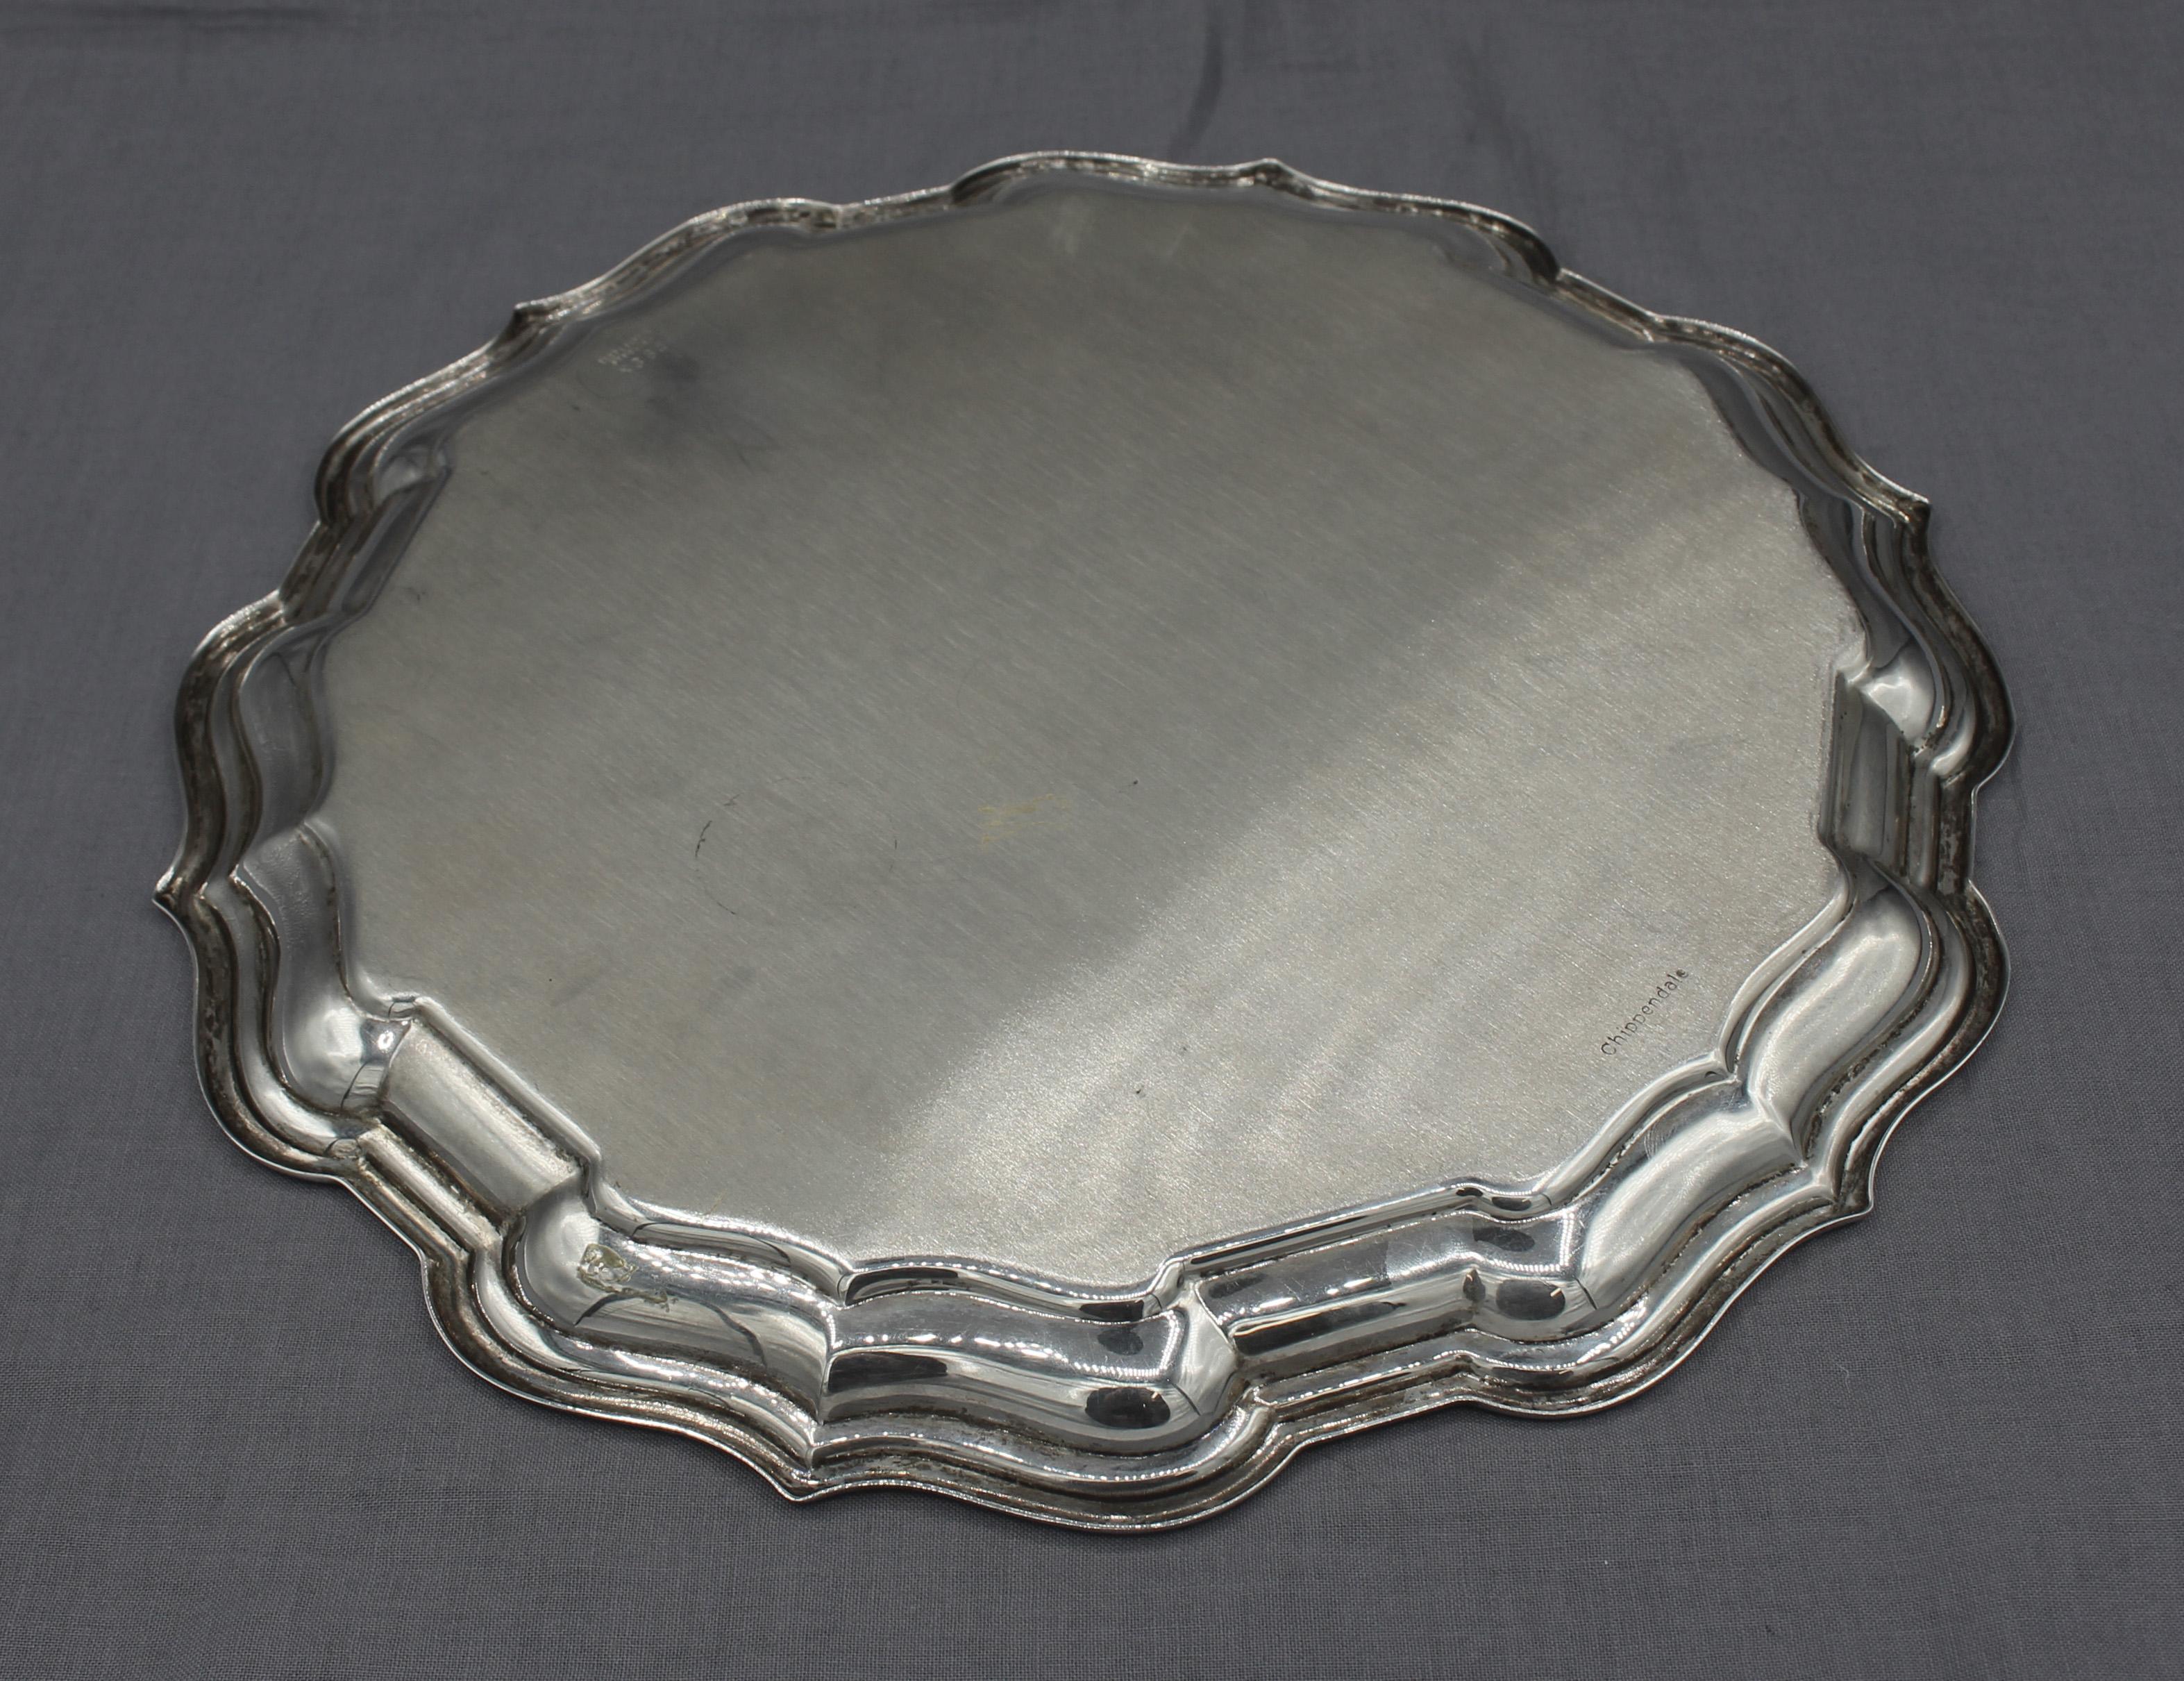 Sterling silver Chippendale pattern salver, c.1970, by Reed & Barton. Marked: Reed & Barton, Sterling, X364, Chippendale. Surface scratches commensurate with age & use. 11.95 troy oz.
10 1/8